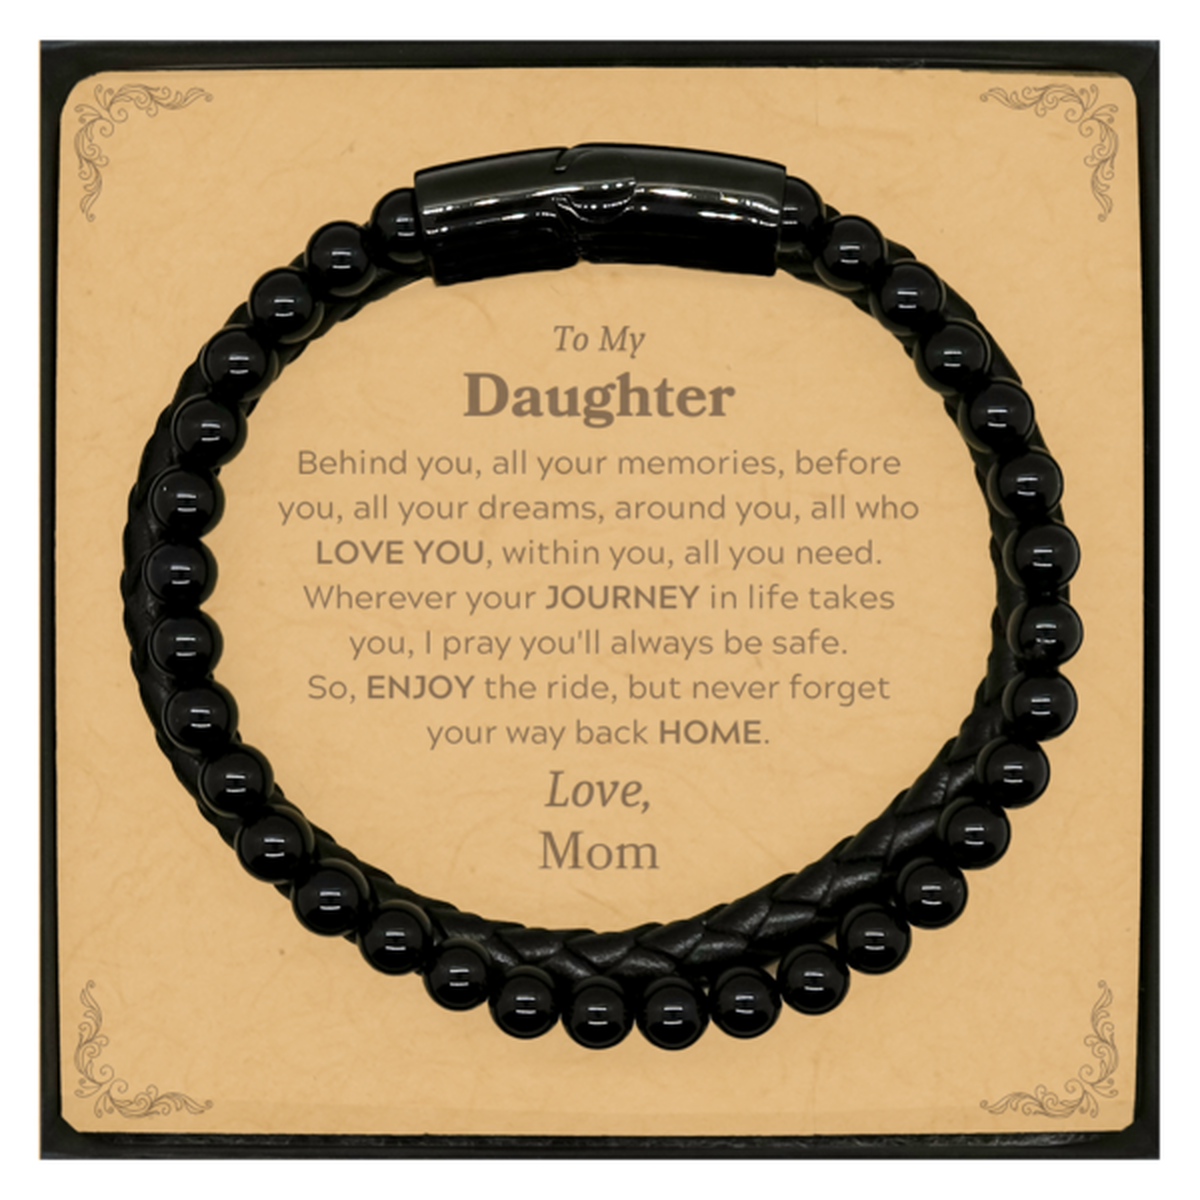 To My Daughter Graduation Gifts from Mom, Daughter Stone Leather Bracelets Christmas Birthday Gifts for Daughter Behind you, all your memories, before you, all your dreams. Love, Mom